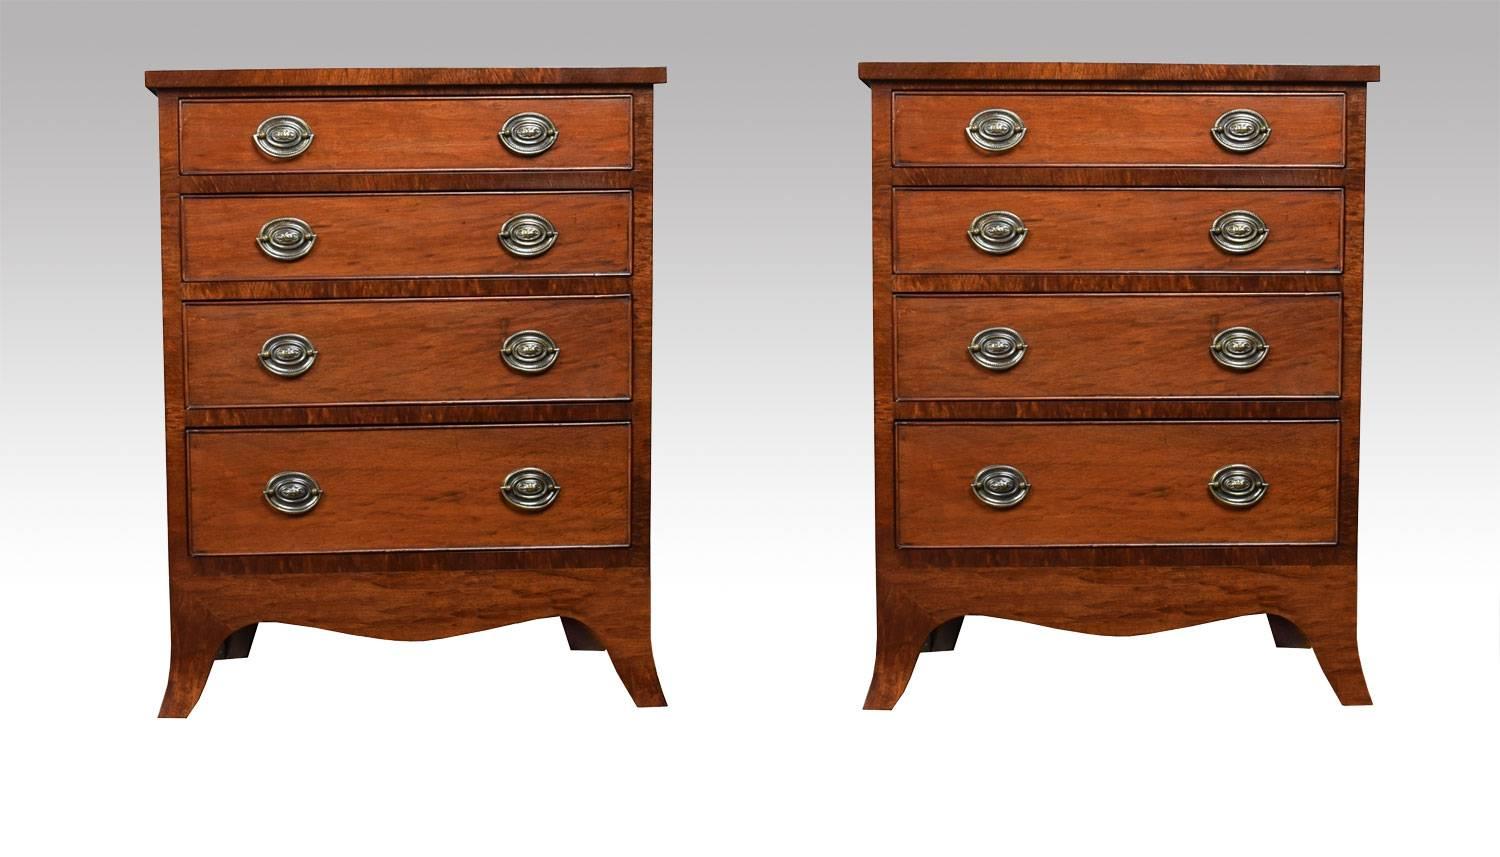 Pair of Edwardian plum pudding mahogany chests of drawers the rectangular figured tops over four long drawers with brass tooled handles and oak liners, all raised up on bracket feet.

Dimensions:

Height 29.5 inches,

width 21.5